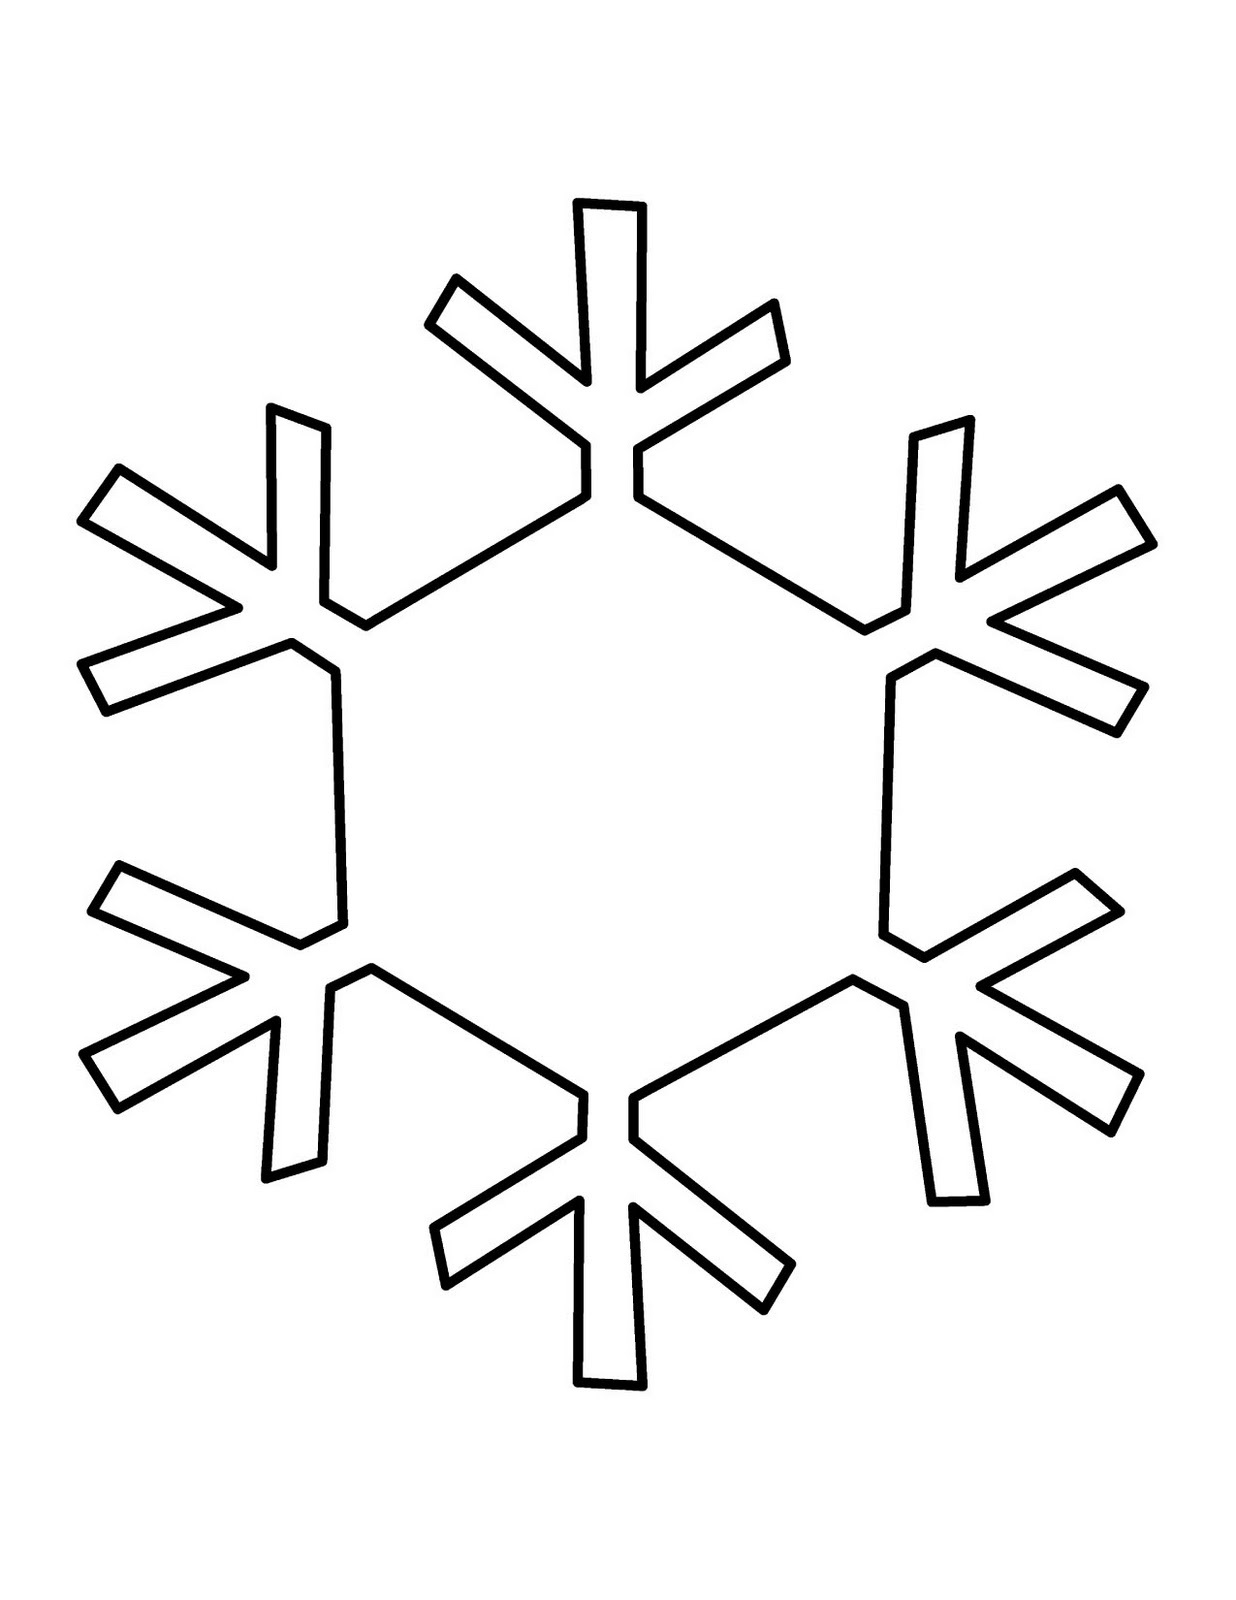 Snowflake Template - ClipArt Best Intended For Blank Snowflake Template